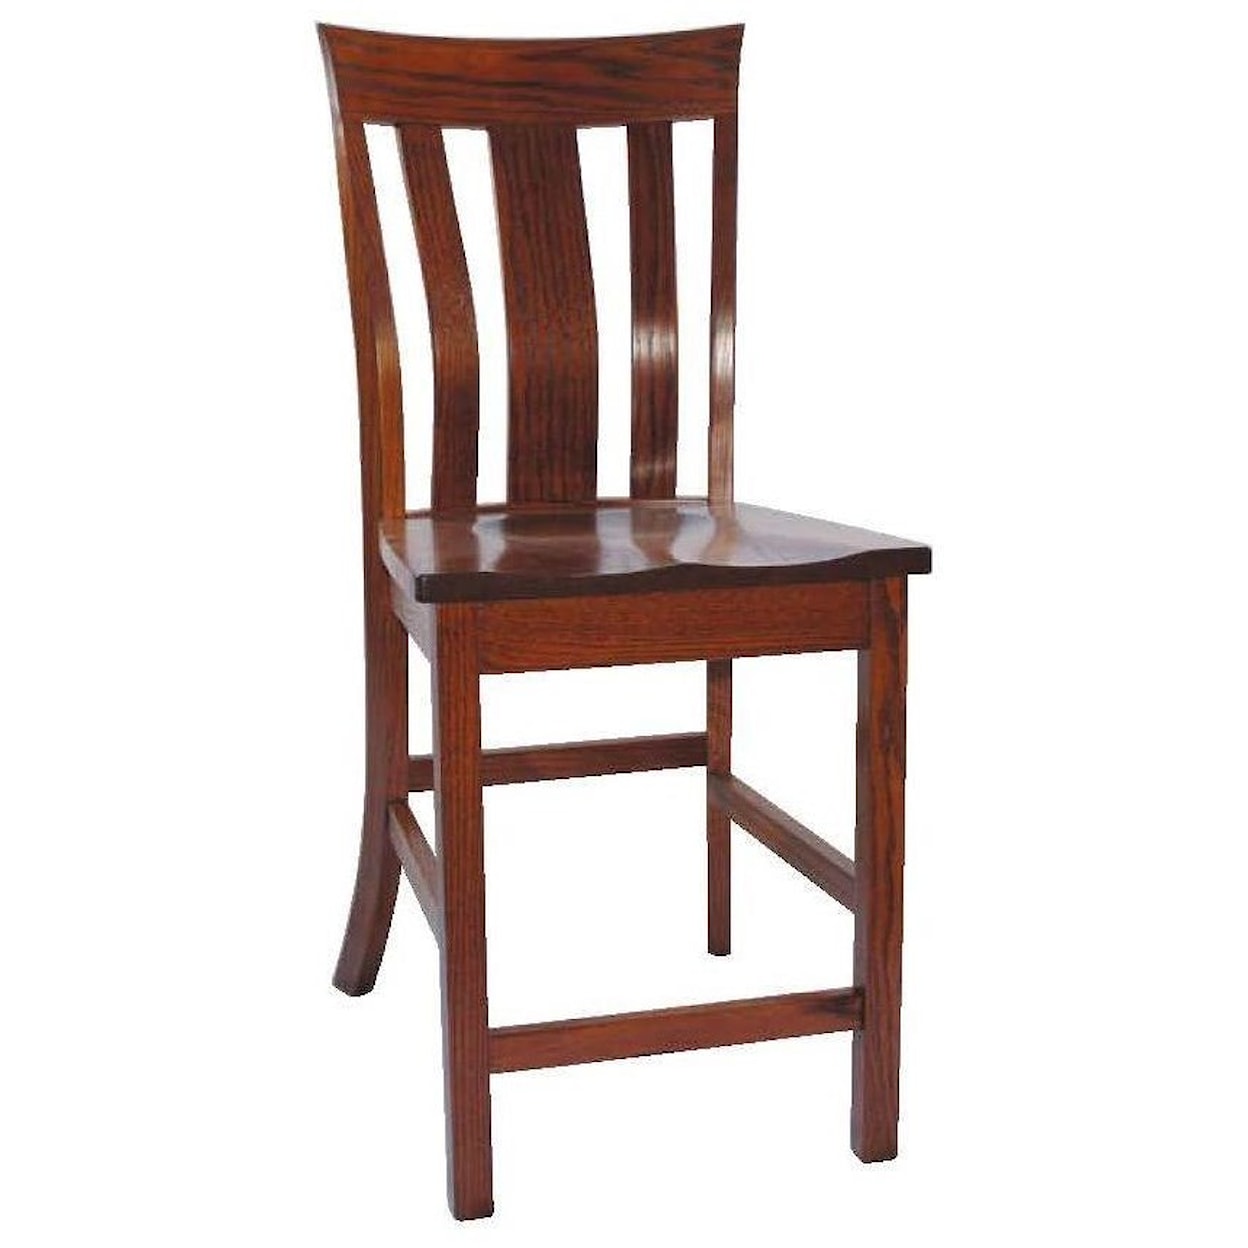 Country Comfort Woodworking McZena 24" Stationary Stool